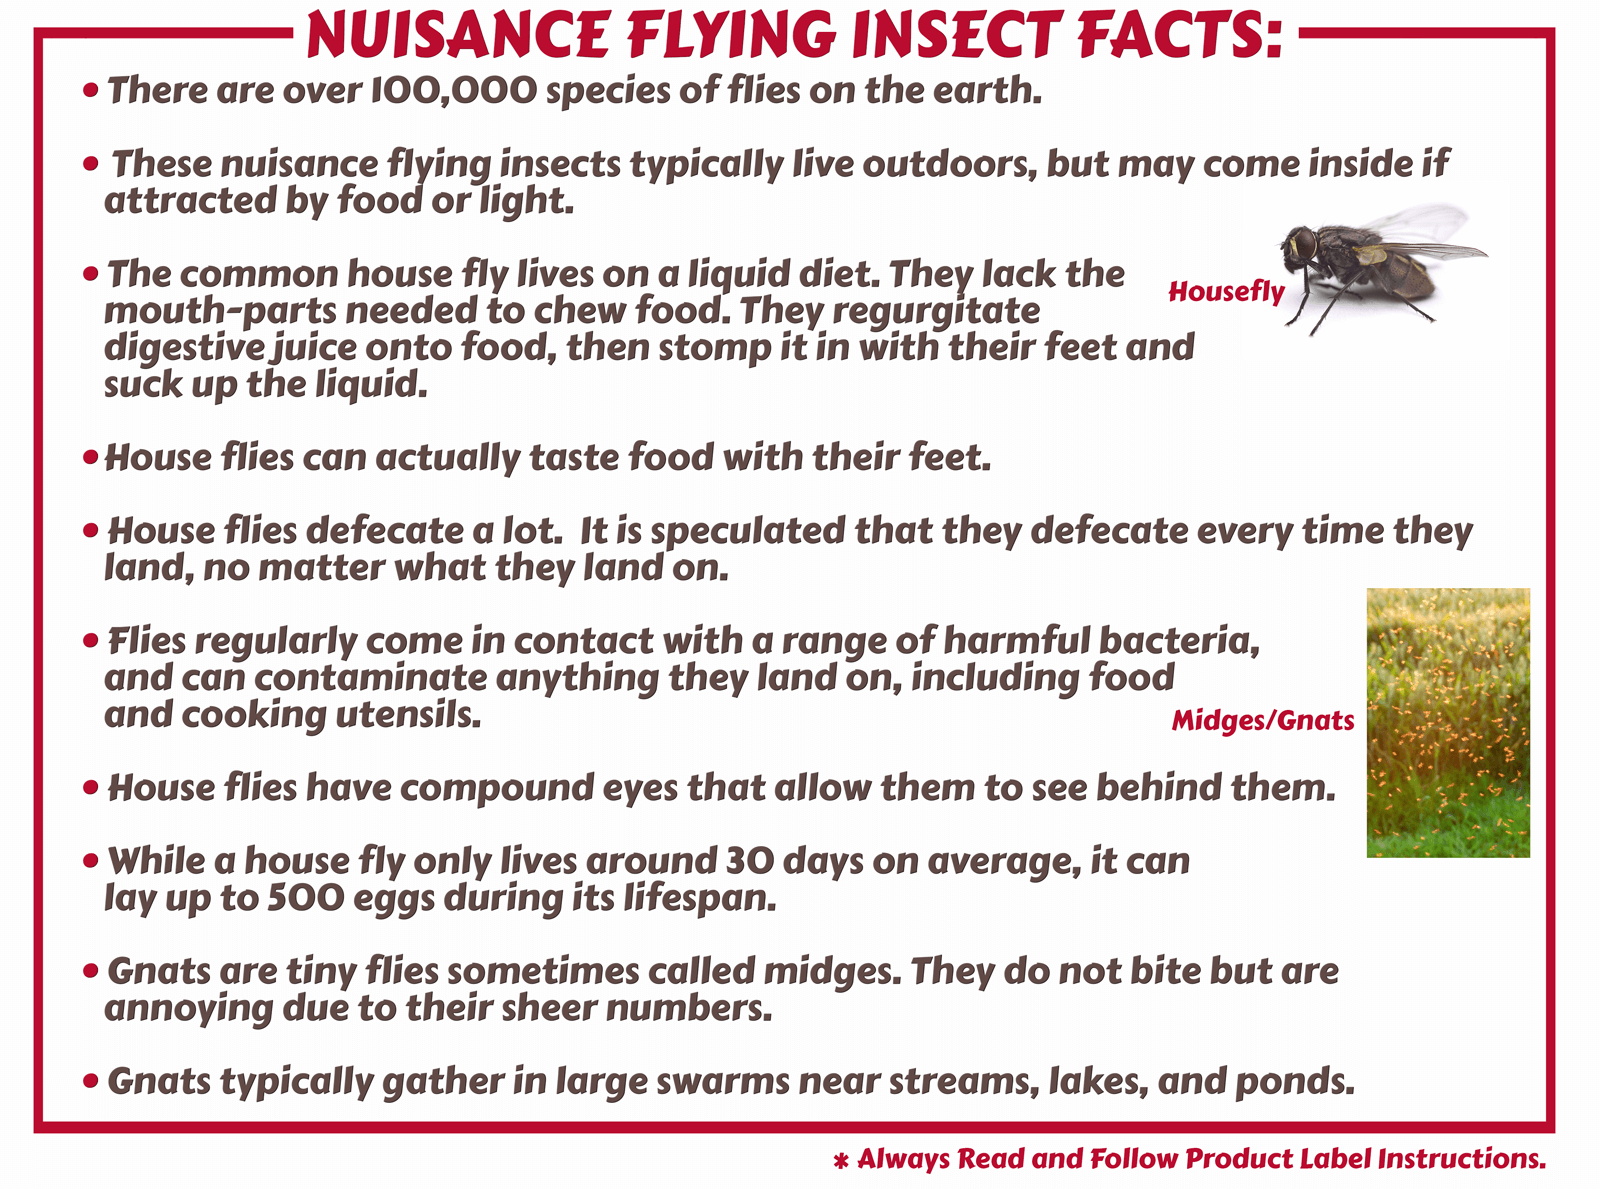 https://cdn.shopify.com/s/files/1/0006/5624/4814/files/NuisanceFlyingInsects-Facts_2048x2048.png?v=1547588497